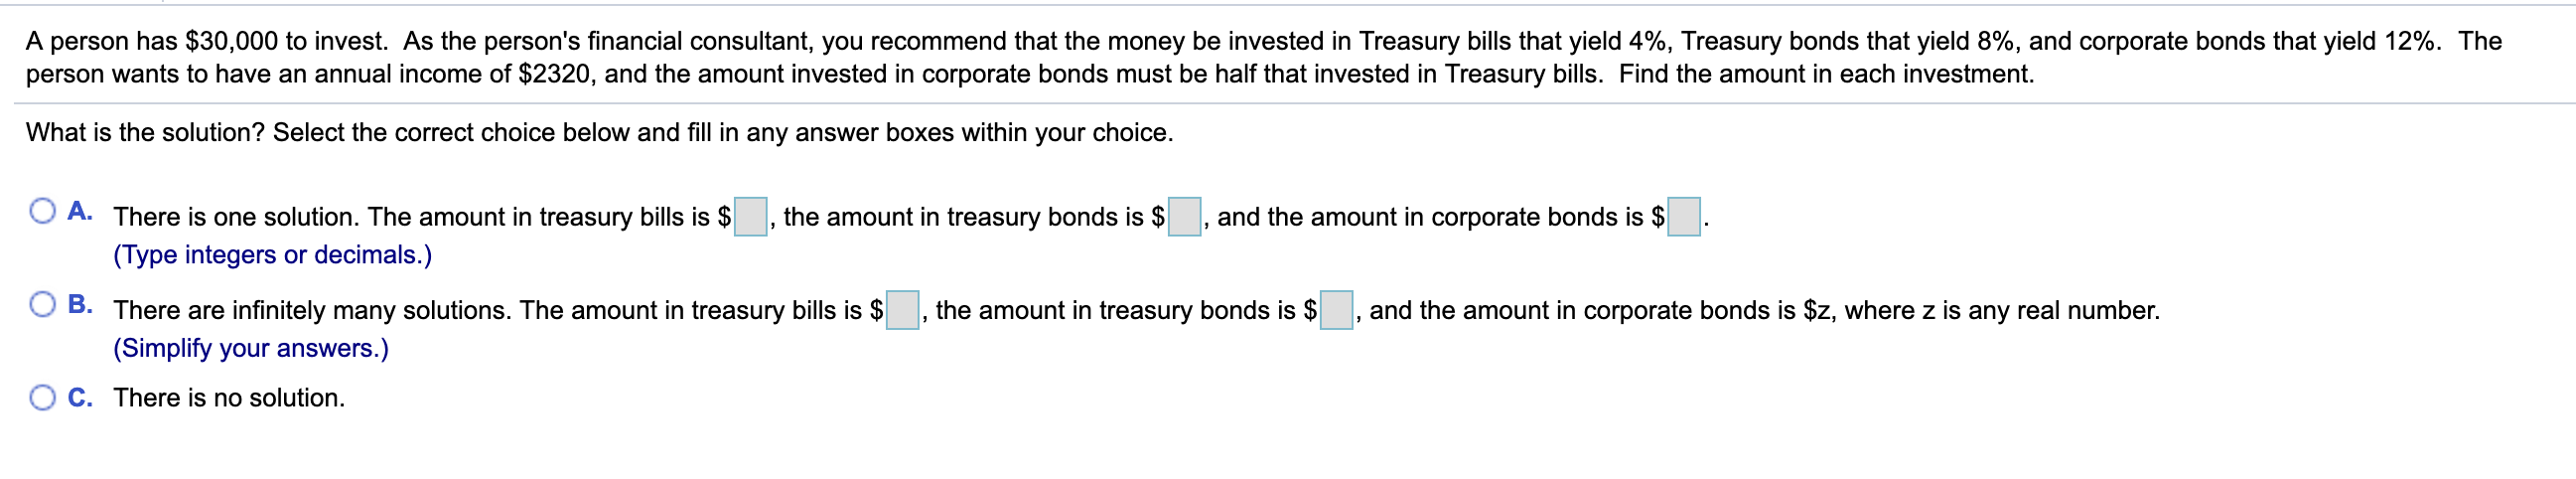 A person has $30,000 to invest. As the person's financial consultant, you recommend that the money be invested in Treasury bills that yield 4%, Treasury bonds that yield 8%, and corporate bonds that yield 12%. The
person wants to have an annual income of $2320, and the amount invested in corporate bonds must be half that invested in Treasury bills. Find the amount in each investment.
What is the solution? Select the correct choice below and fill in any answer boxes within your choice.
A. There is one solution. The amount in treasury bills is $
the amount in treasury bonds is $
and the amount in corporate bonds is $
(Type integers or decimals.)
B. There are infinitely many solutions. The amount in treasury bills is $
the amount in treasury bonds is $
and the amount in corporate bonds is $z, where z is any real number.
(Simplify your answers.)
C. There is no solution.
